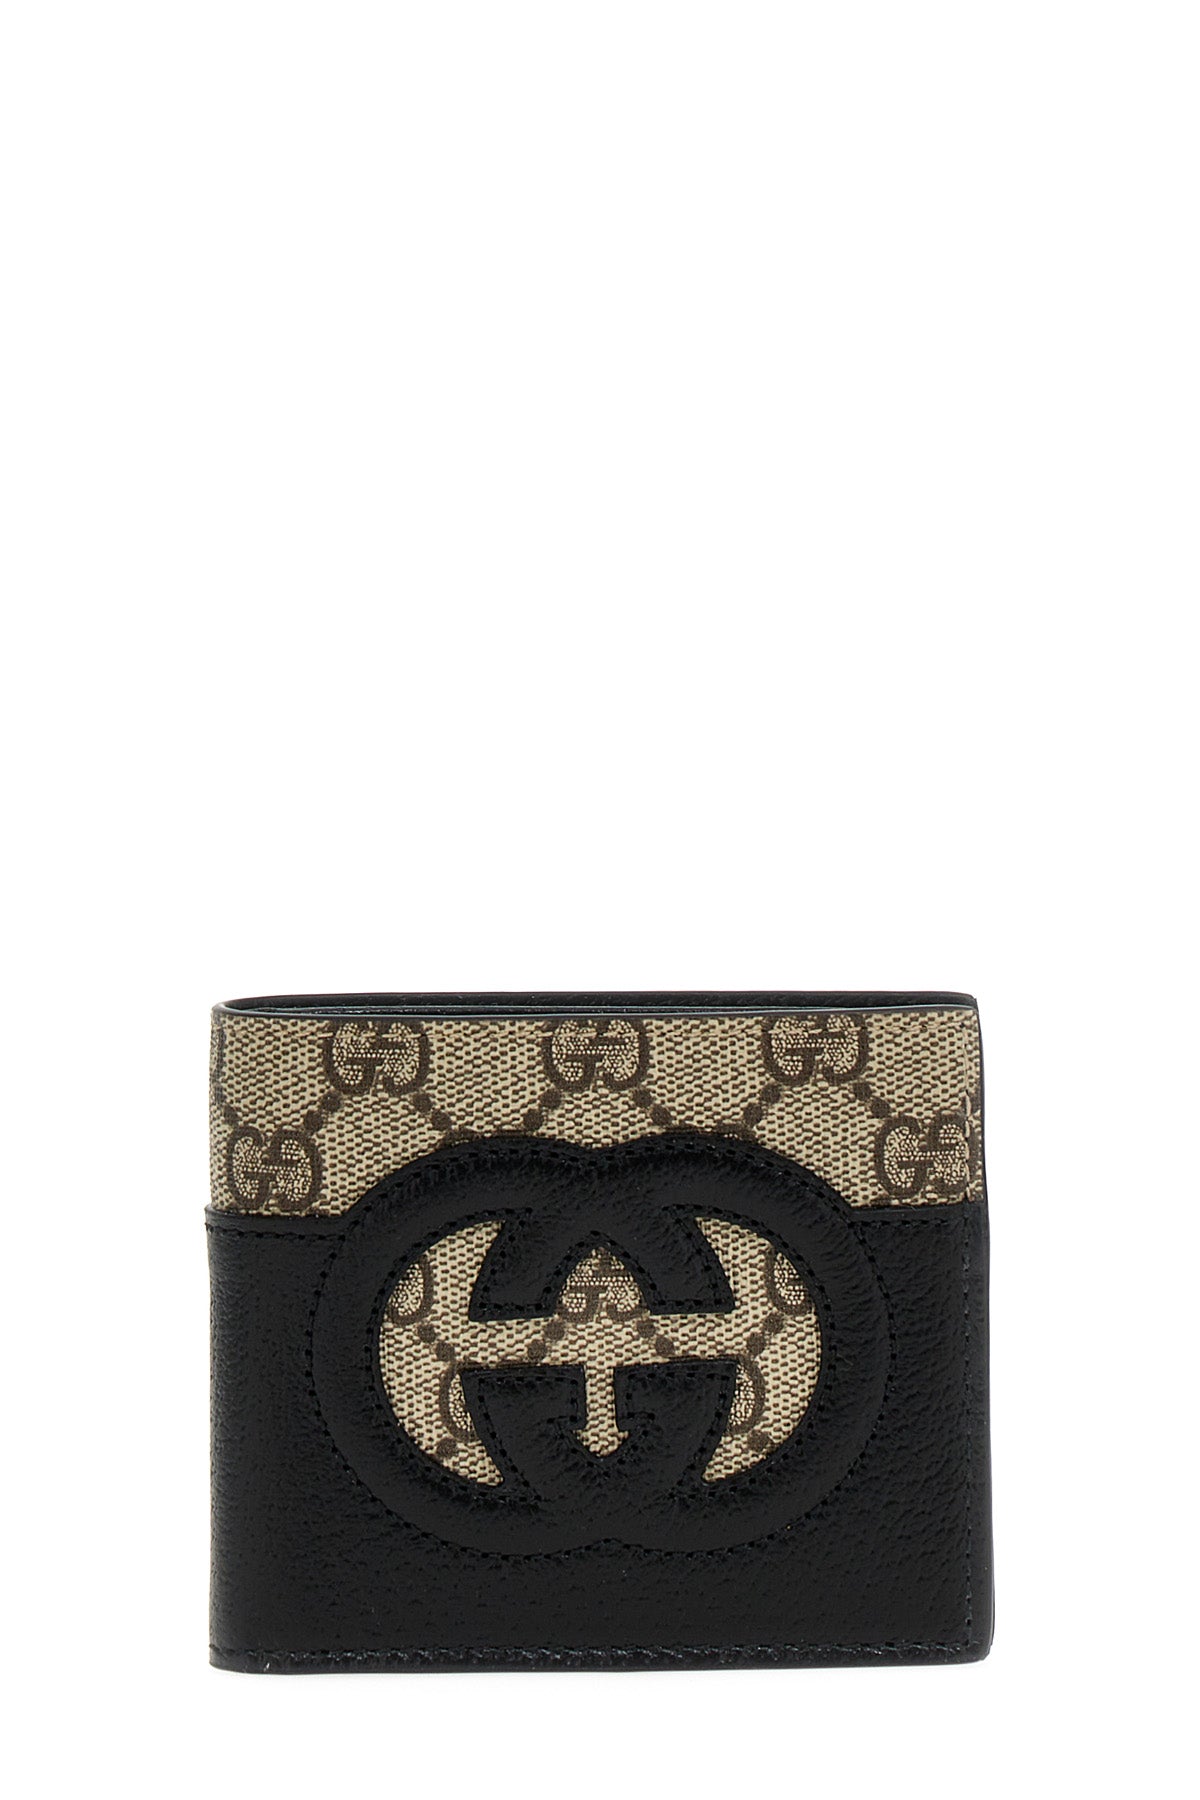 GUCCI 'CROSSOVER GG' WALLET